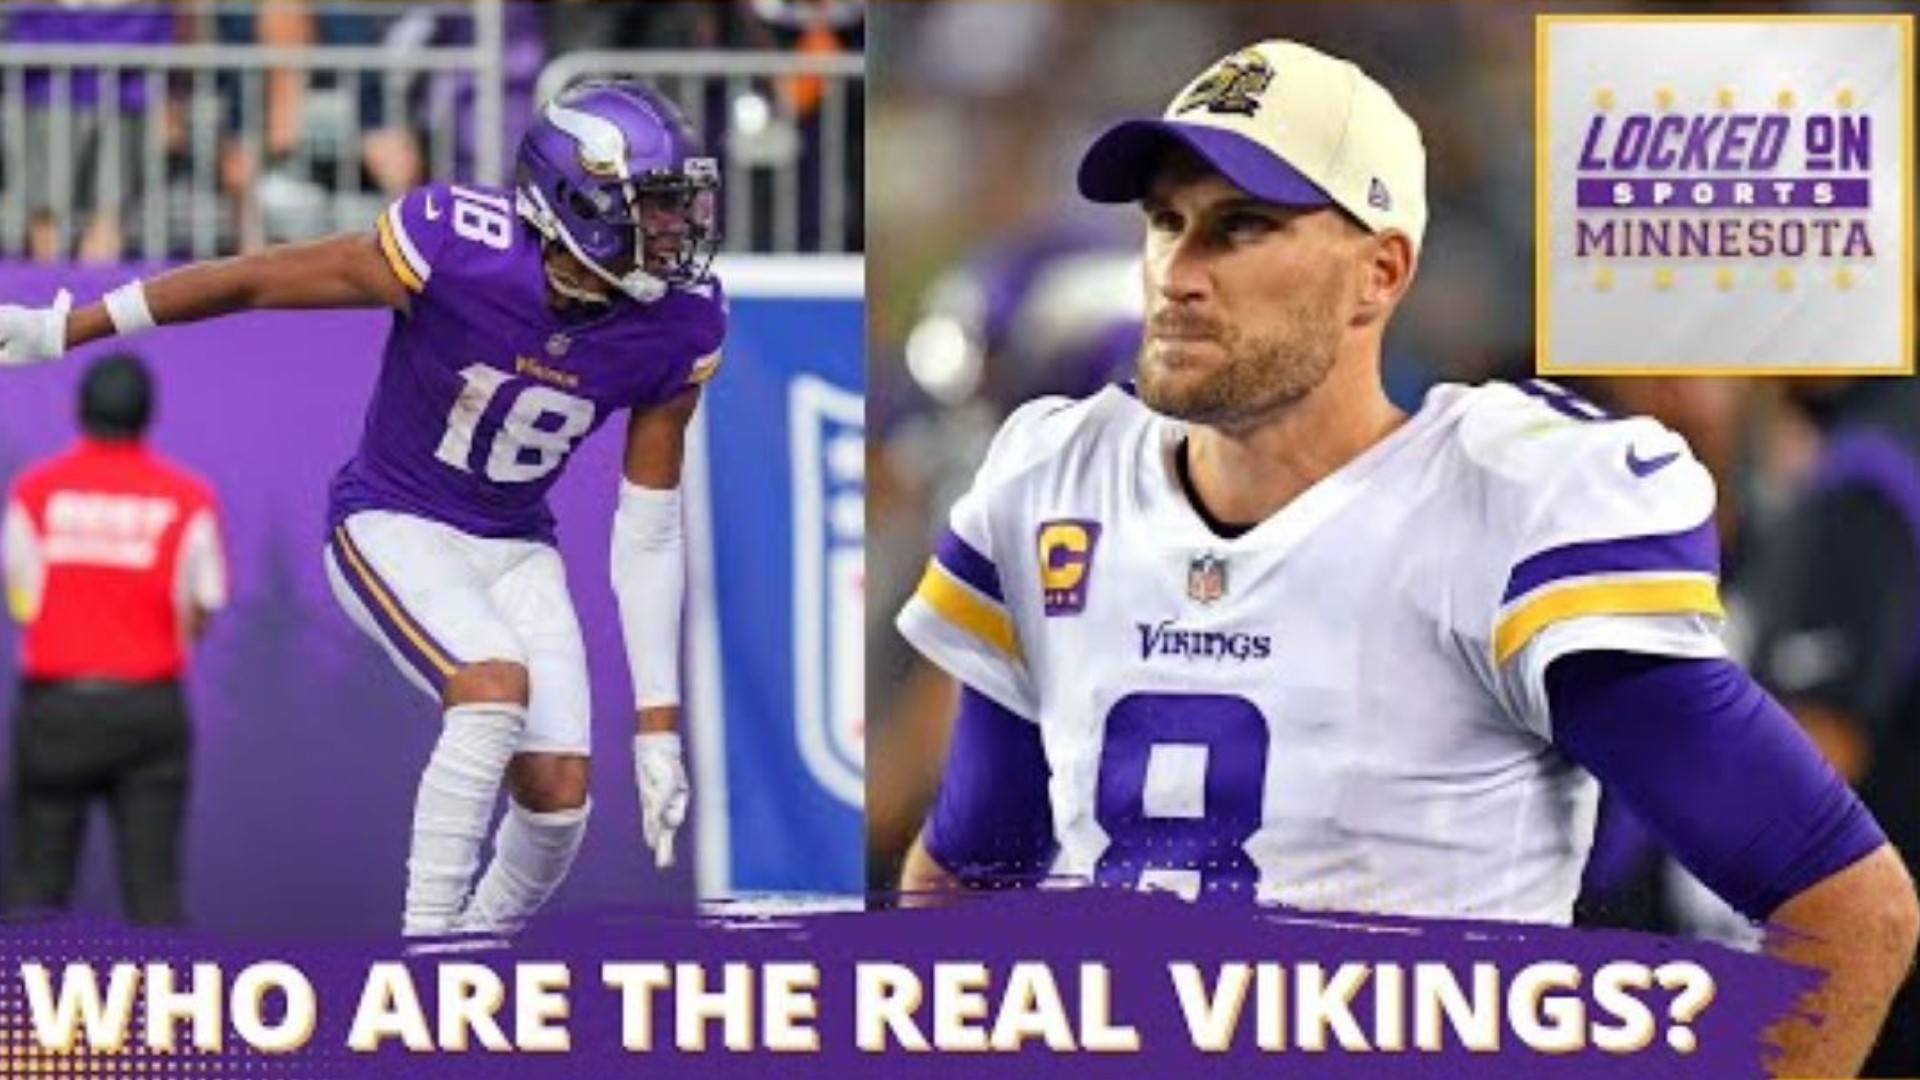 The Minnesota Vikings and Detroit Lions are ready for a big Week 3 matchup. Which Vikings team will emerge after polar opposite performances in the first two weeks?